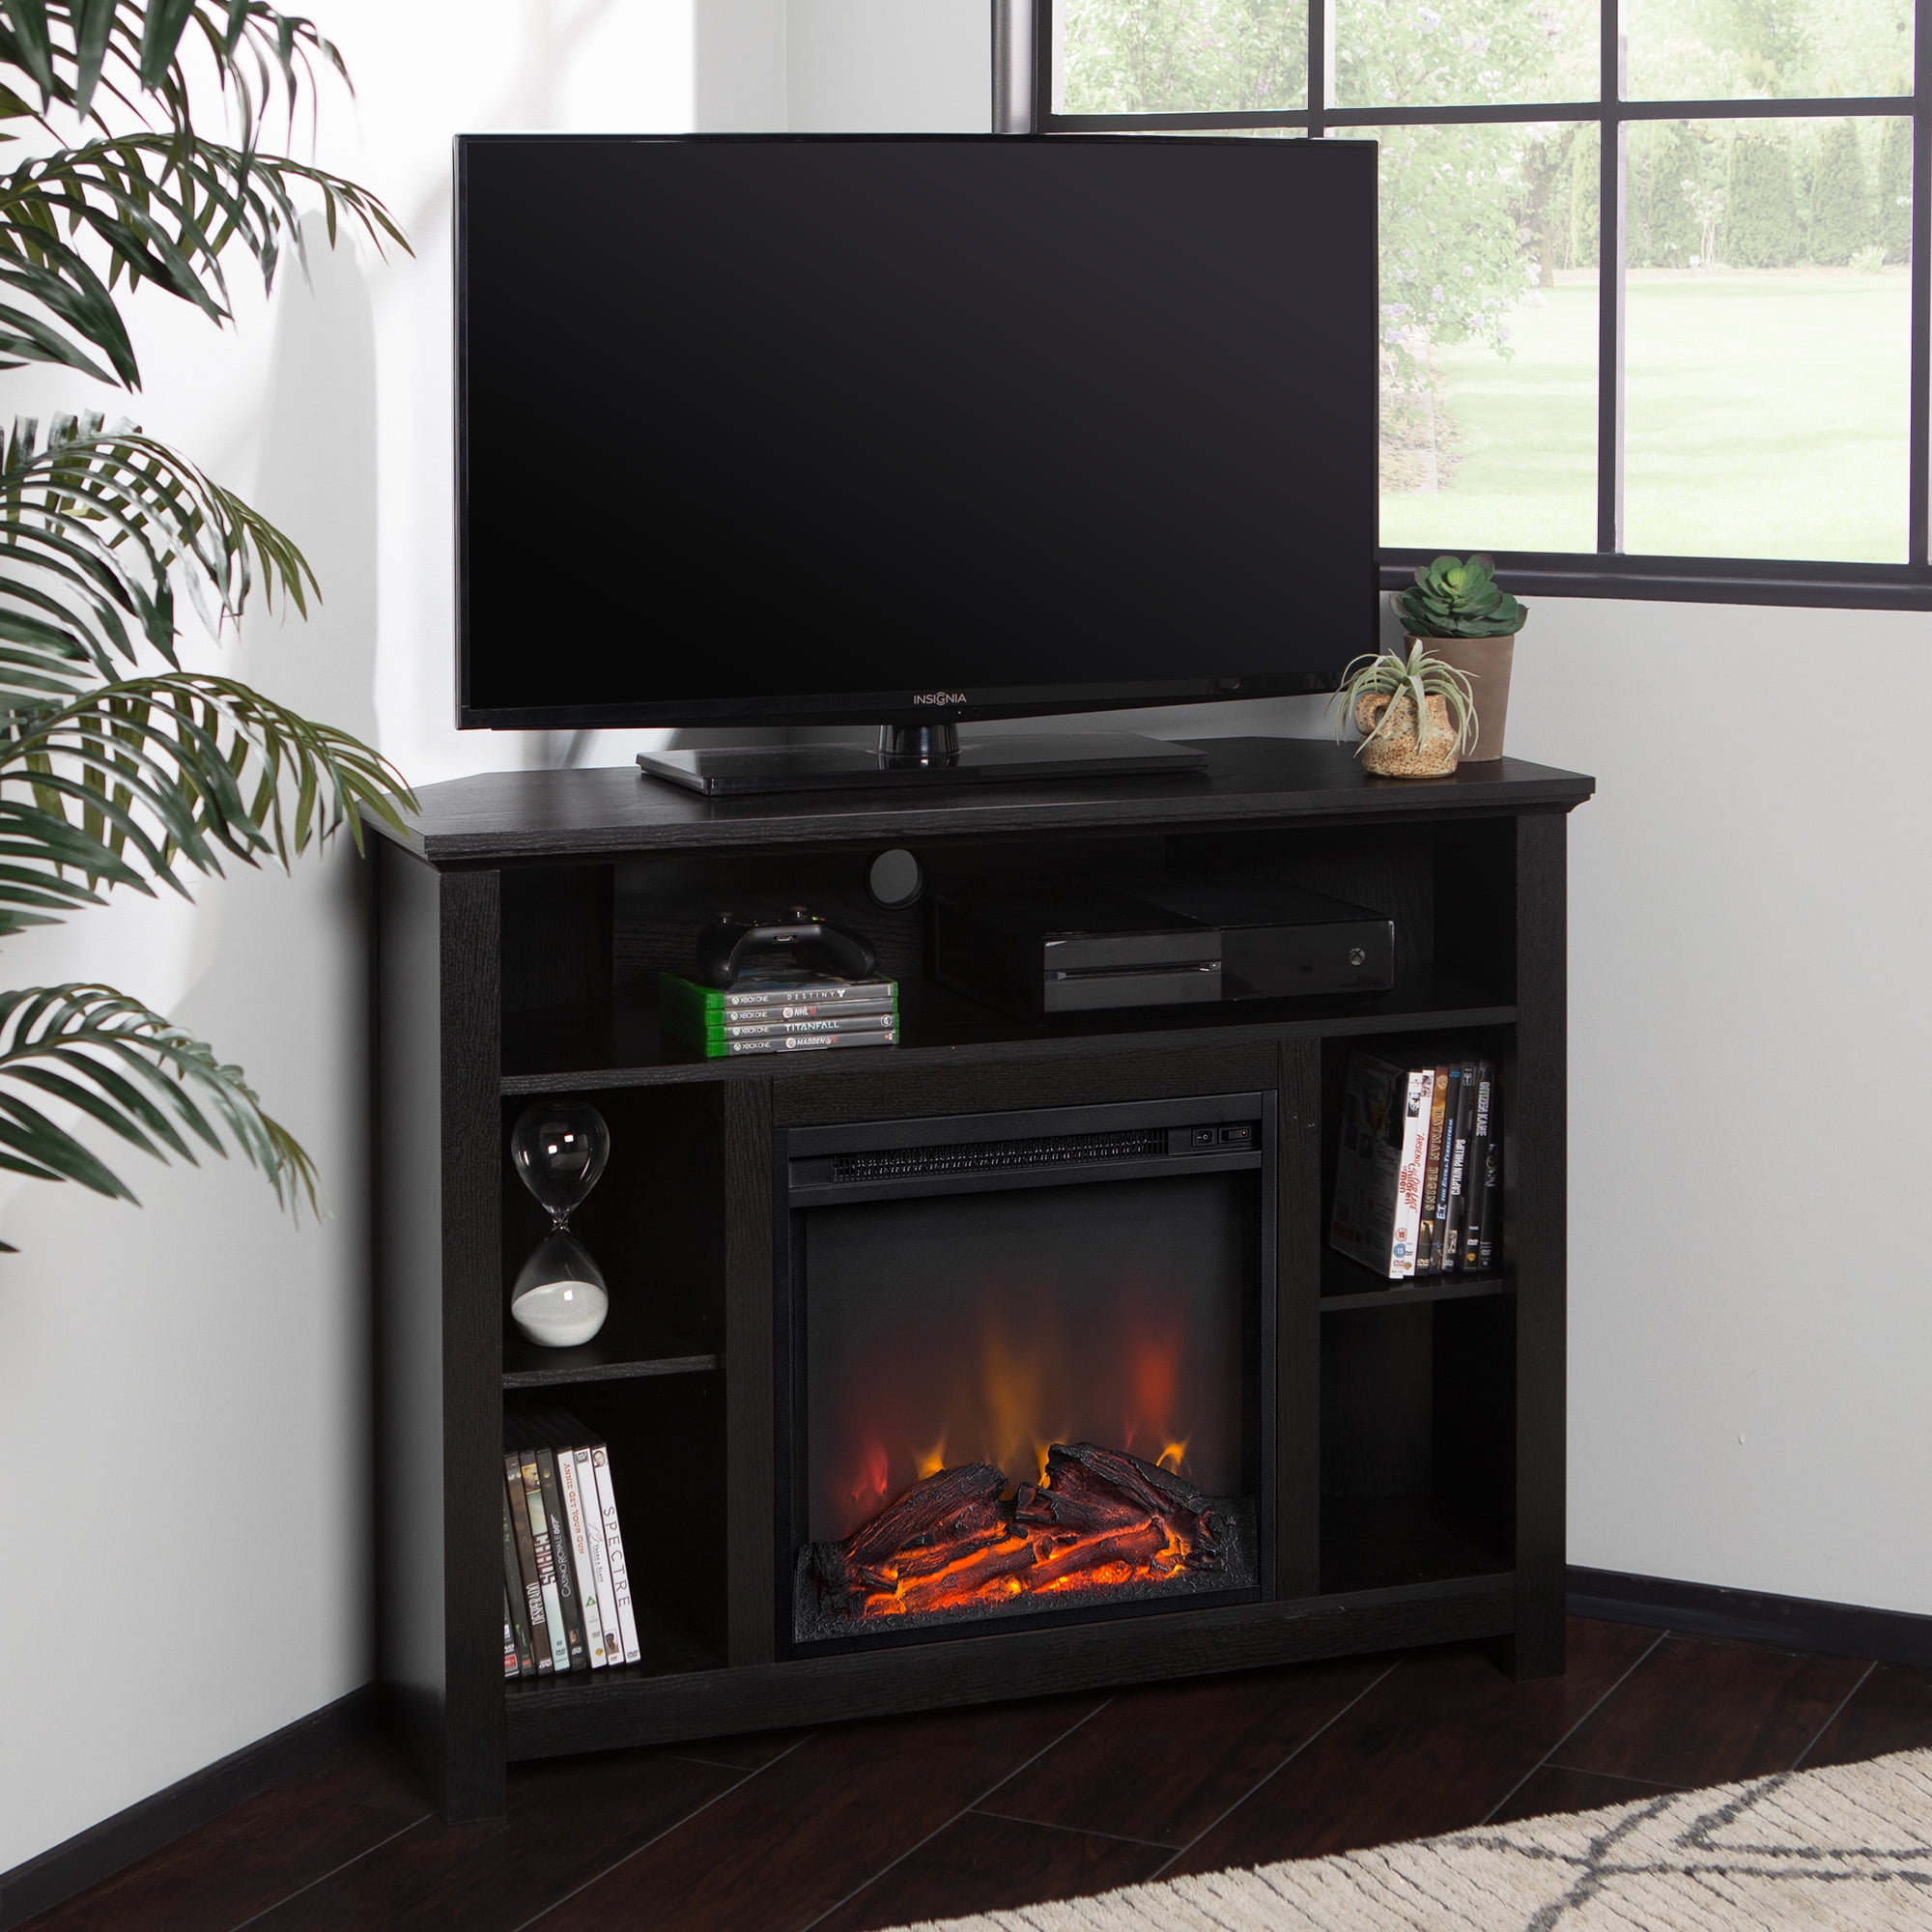 Manor Park Tall Corner Fireplace Tv, Corner Tv Stand With Fireplace 65 Inches